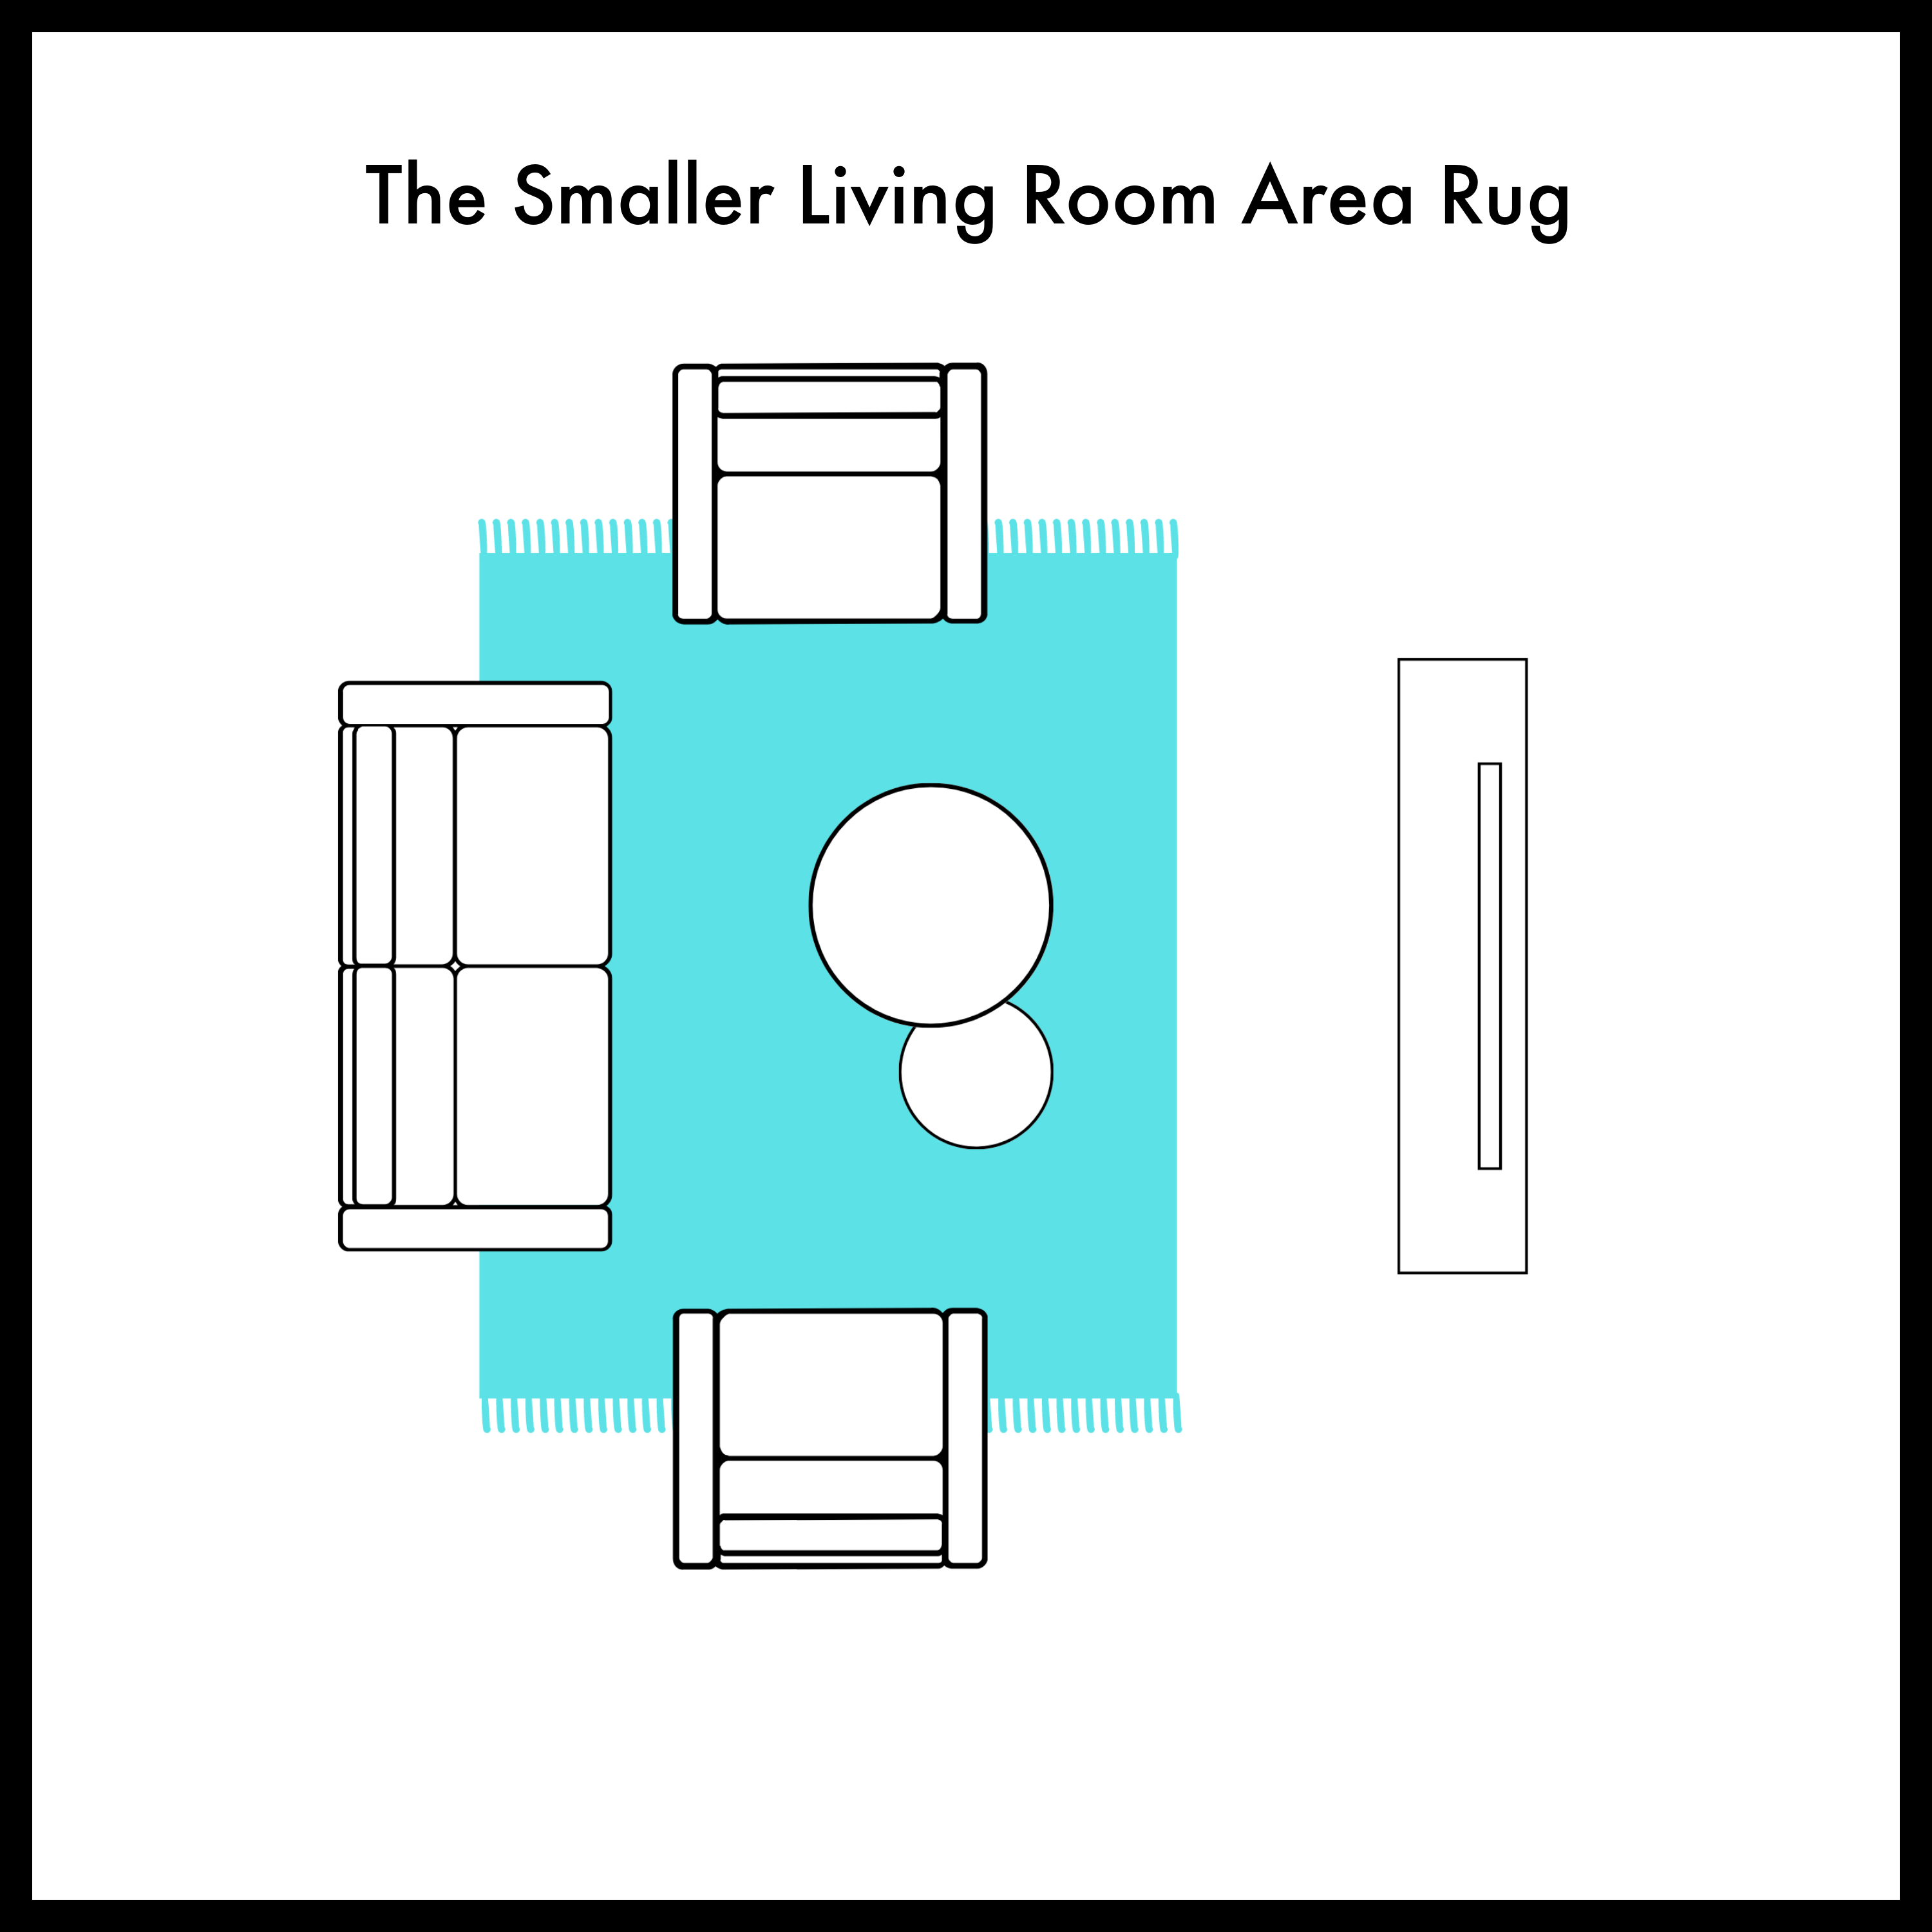 The Smaller Living Room Area Rug